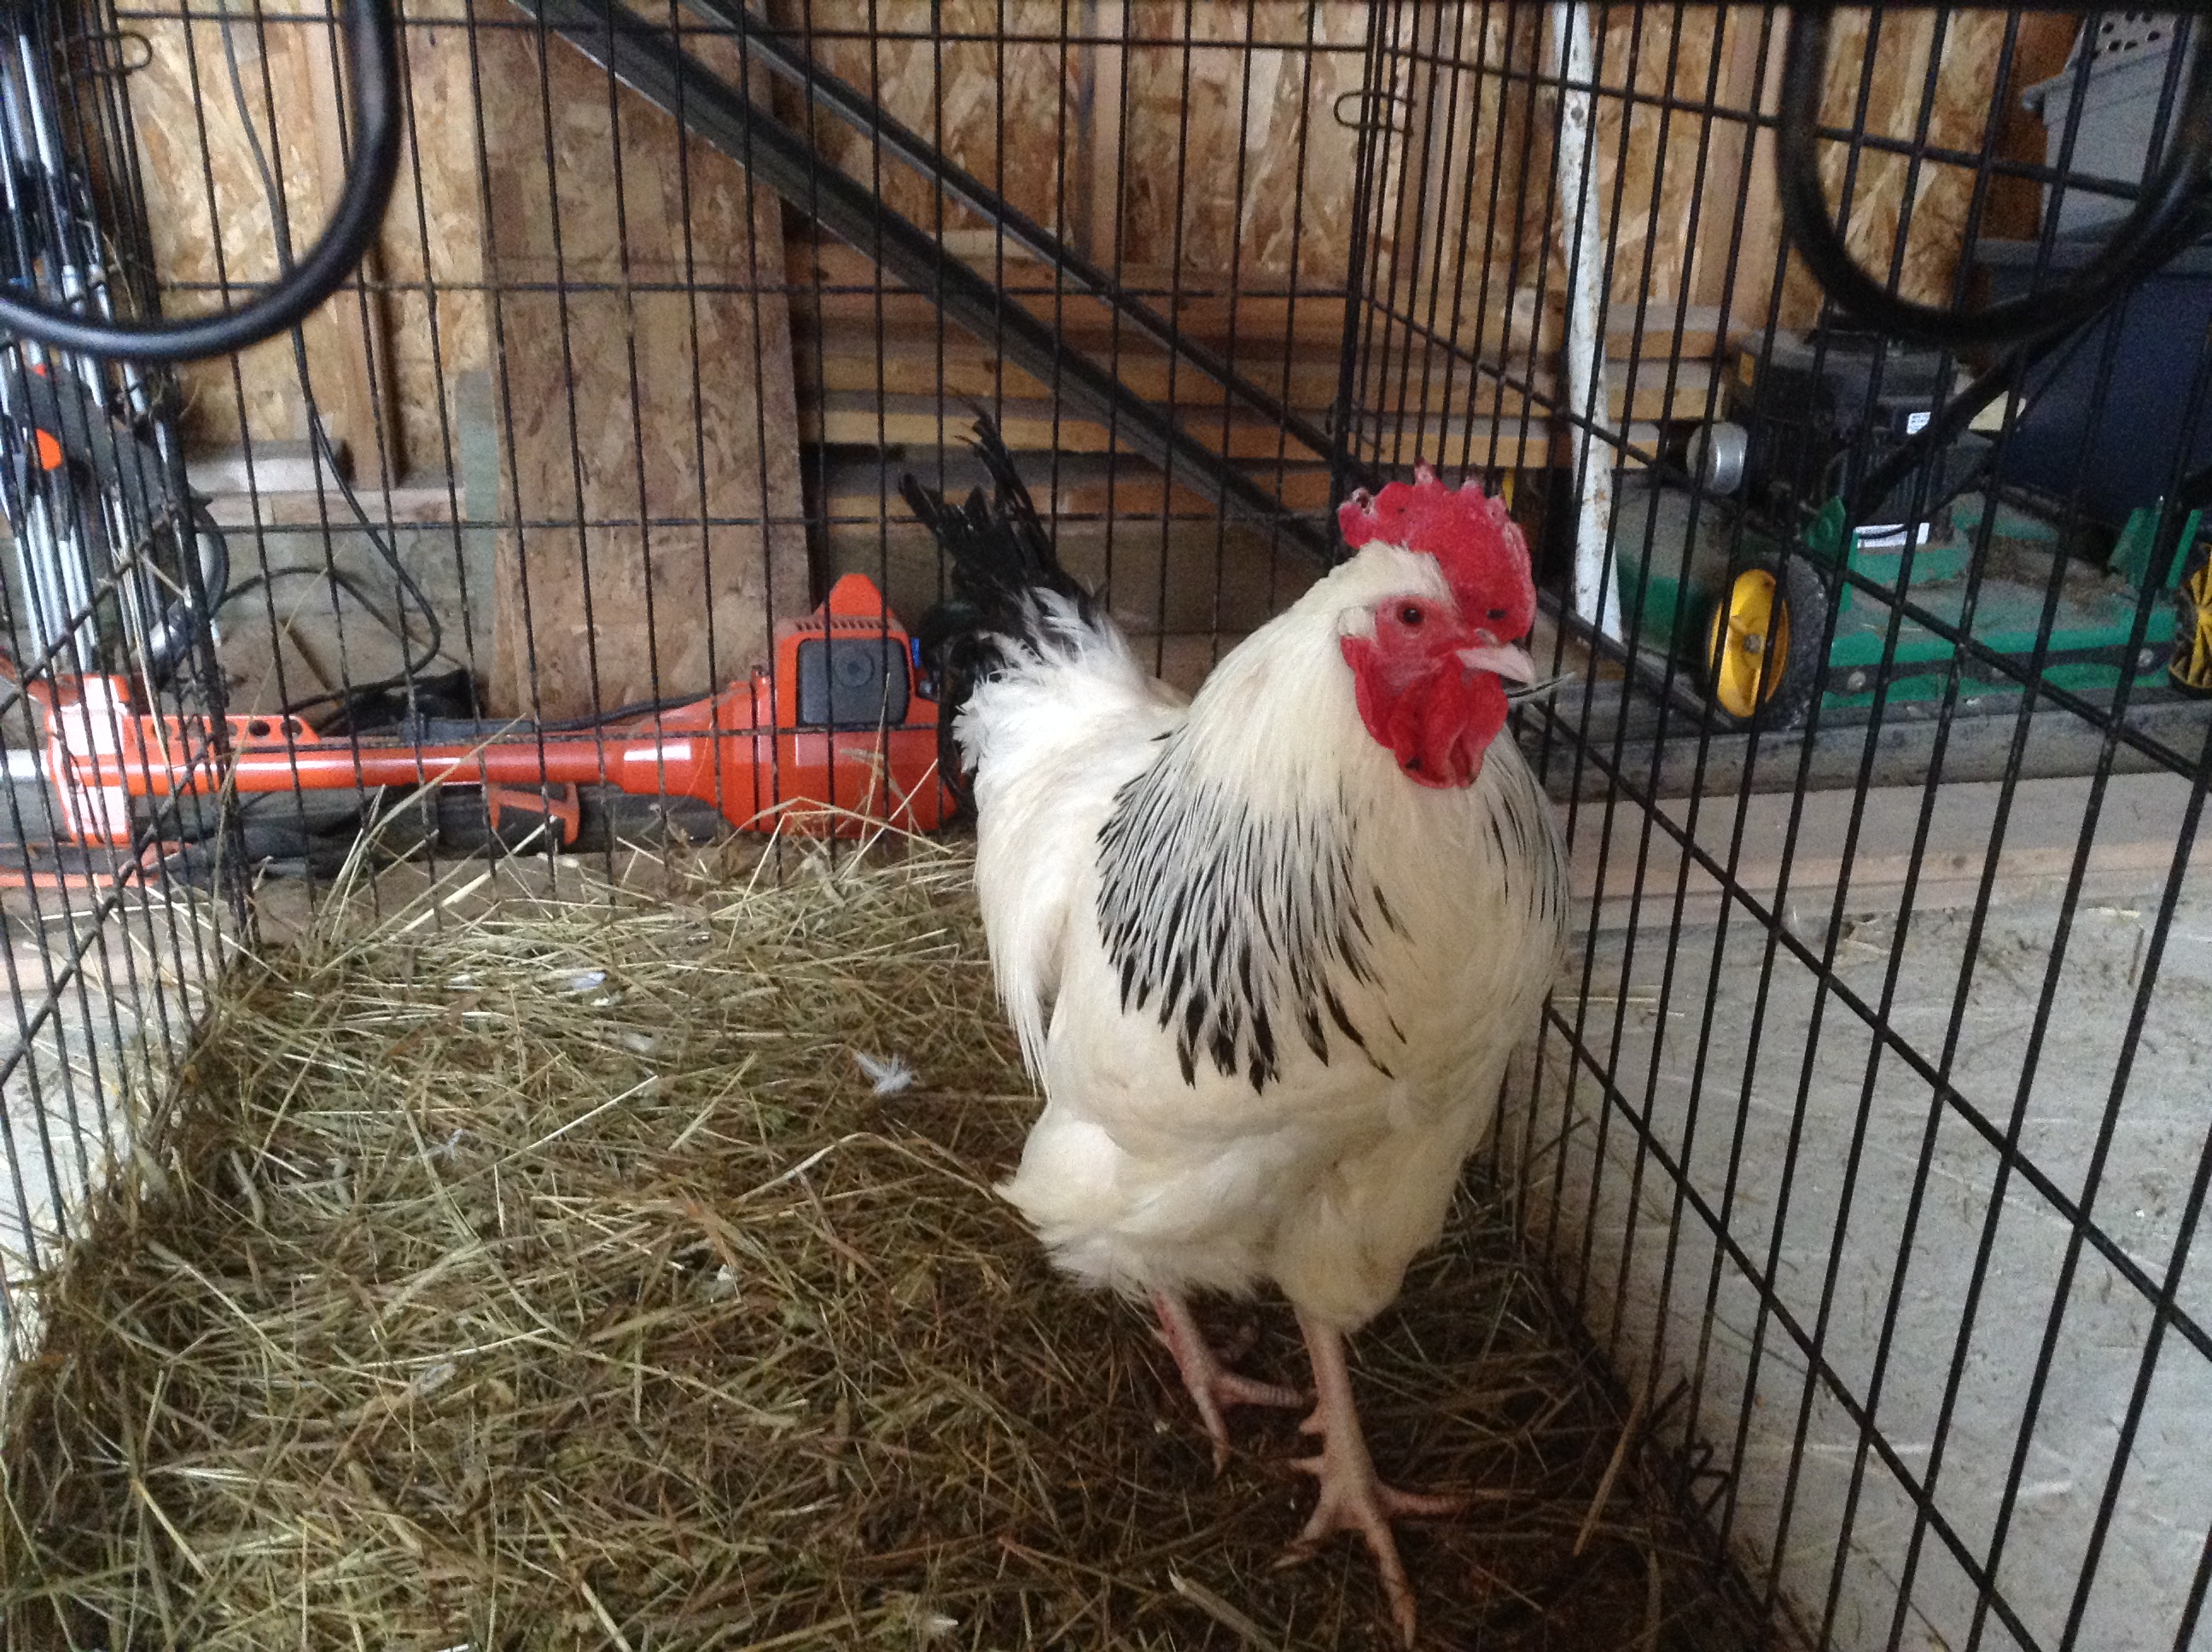 My light Sussex rooster.